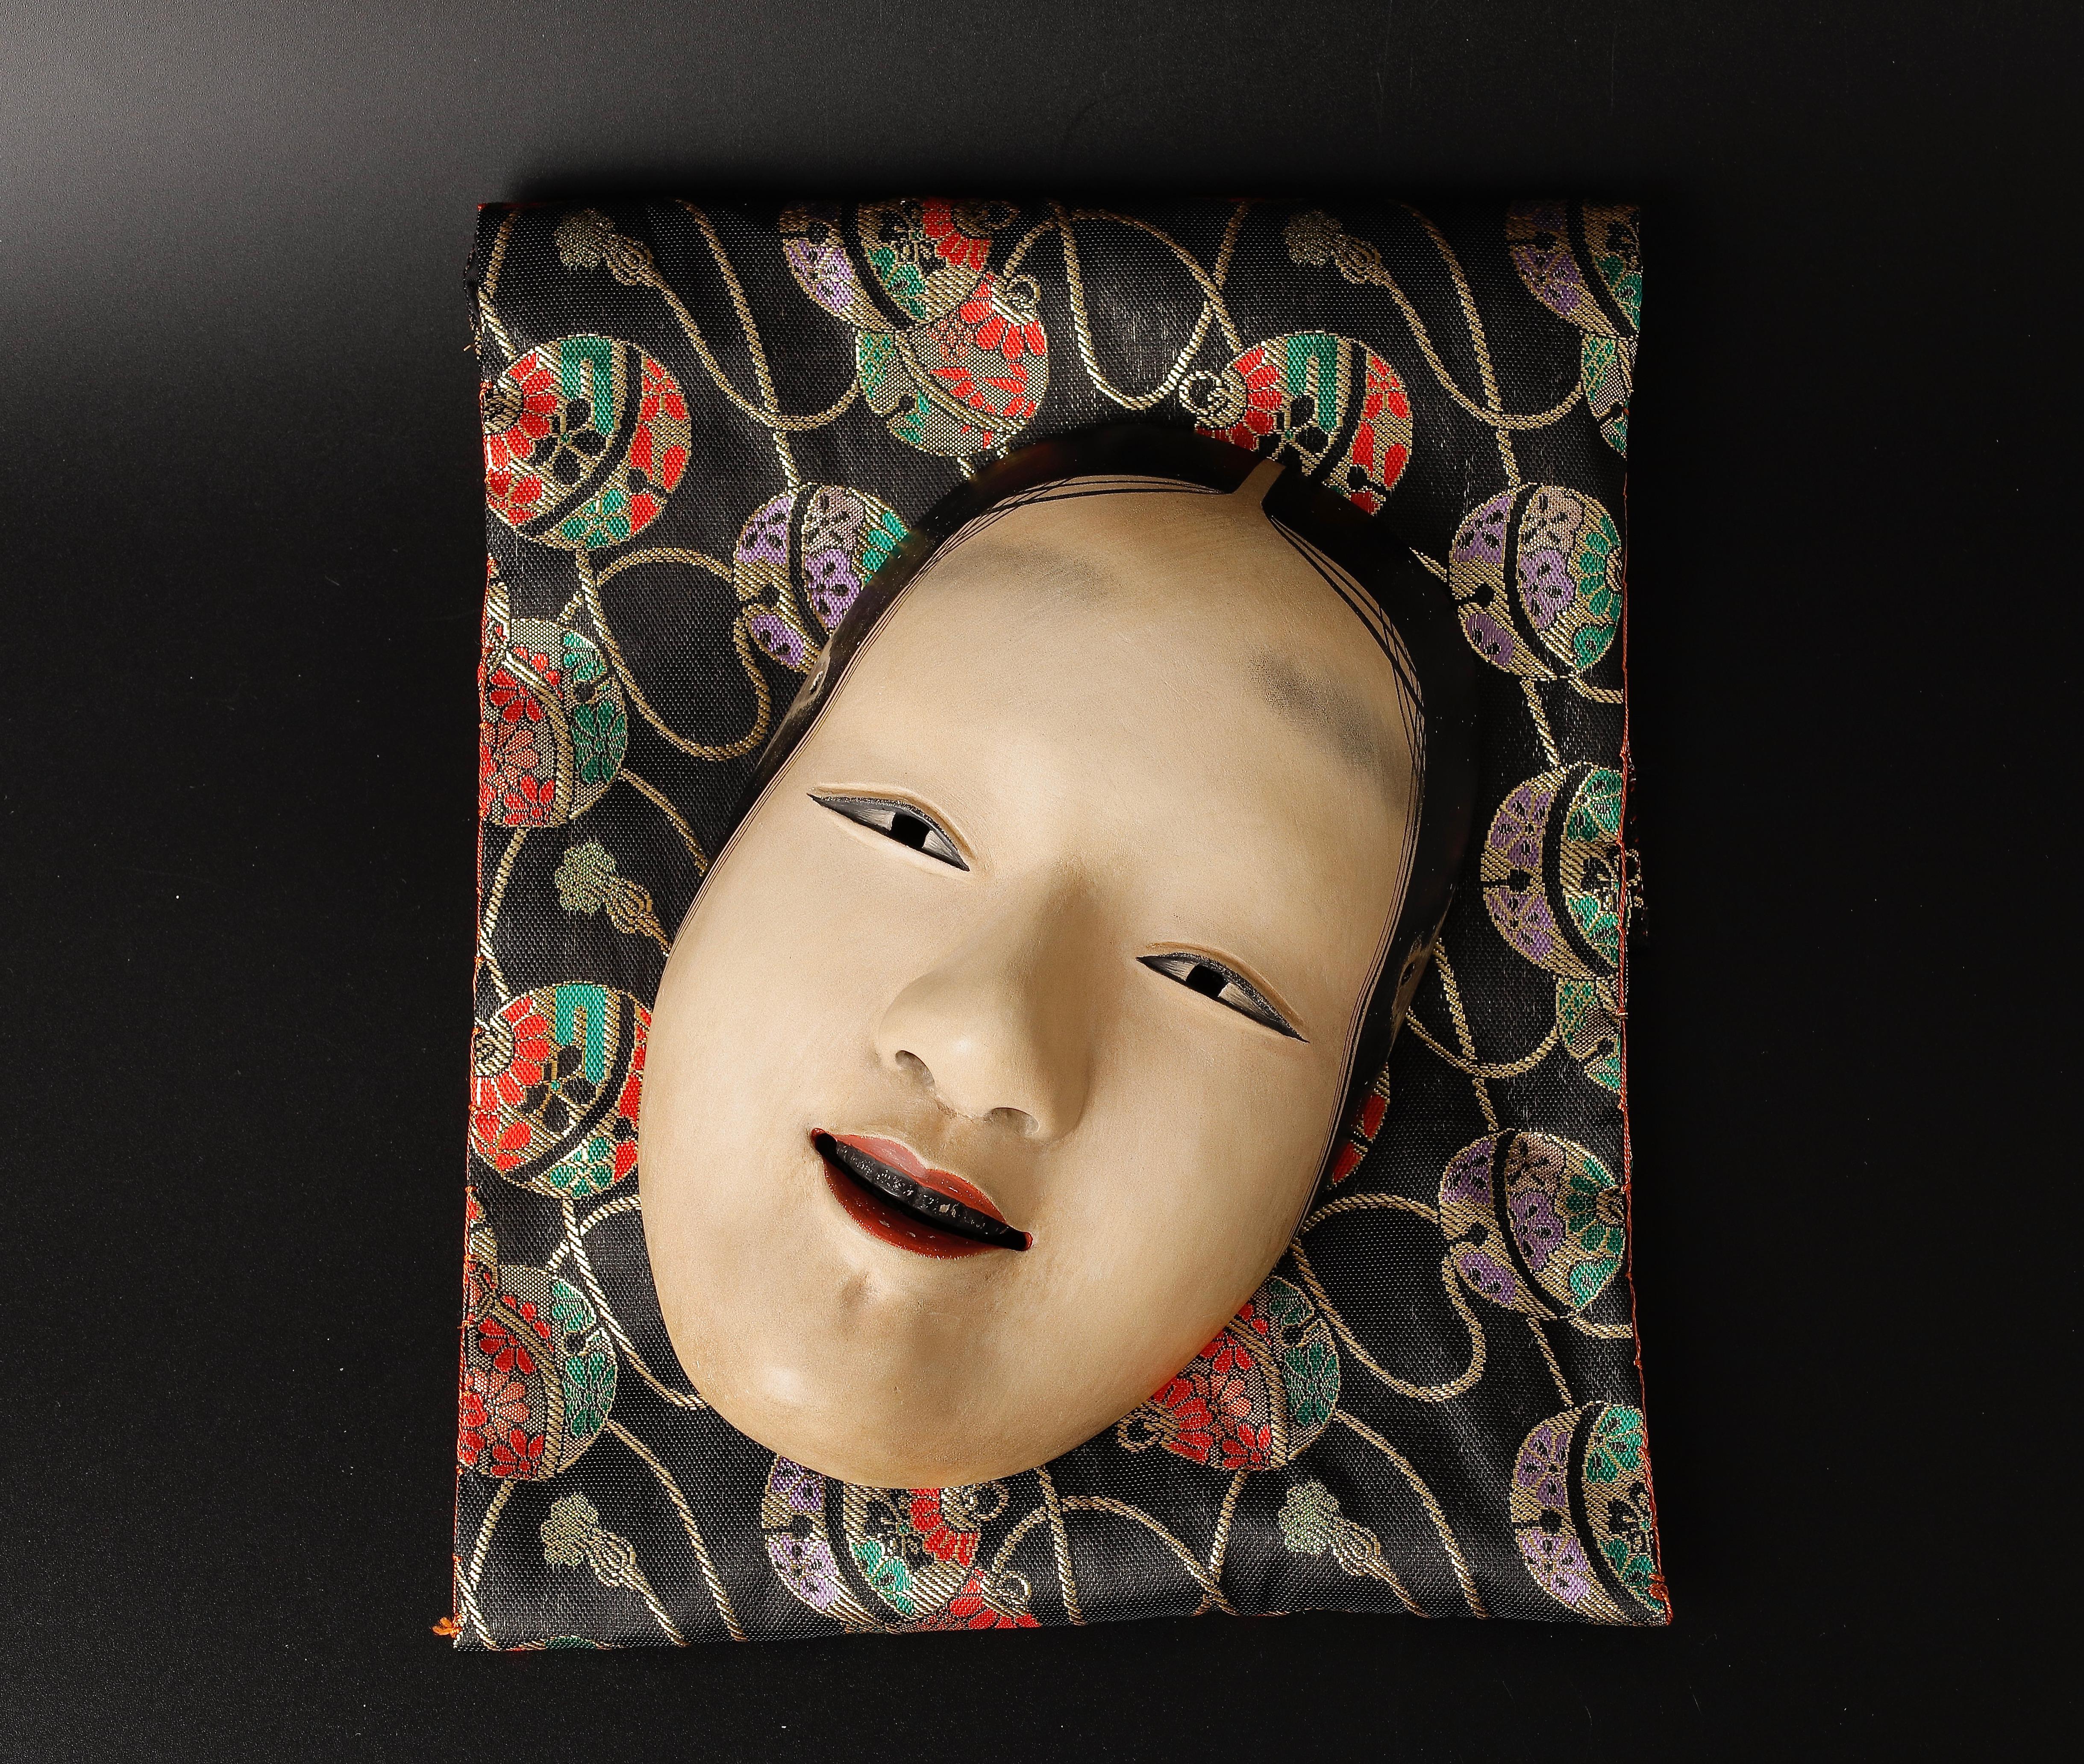 Waka onna Noh Mask representing a young woman
Dated: 1996 
Signed: Tairo
Size: 13.5 x 21.5 x 7 cm (5.5 x 8.5 x 3 inch)
Weight: 130g (0.3 lb)
Material: wood with gofun paint

Good condition, some minor abrasions as you see in photos.


